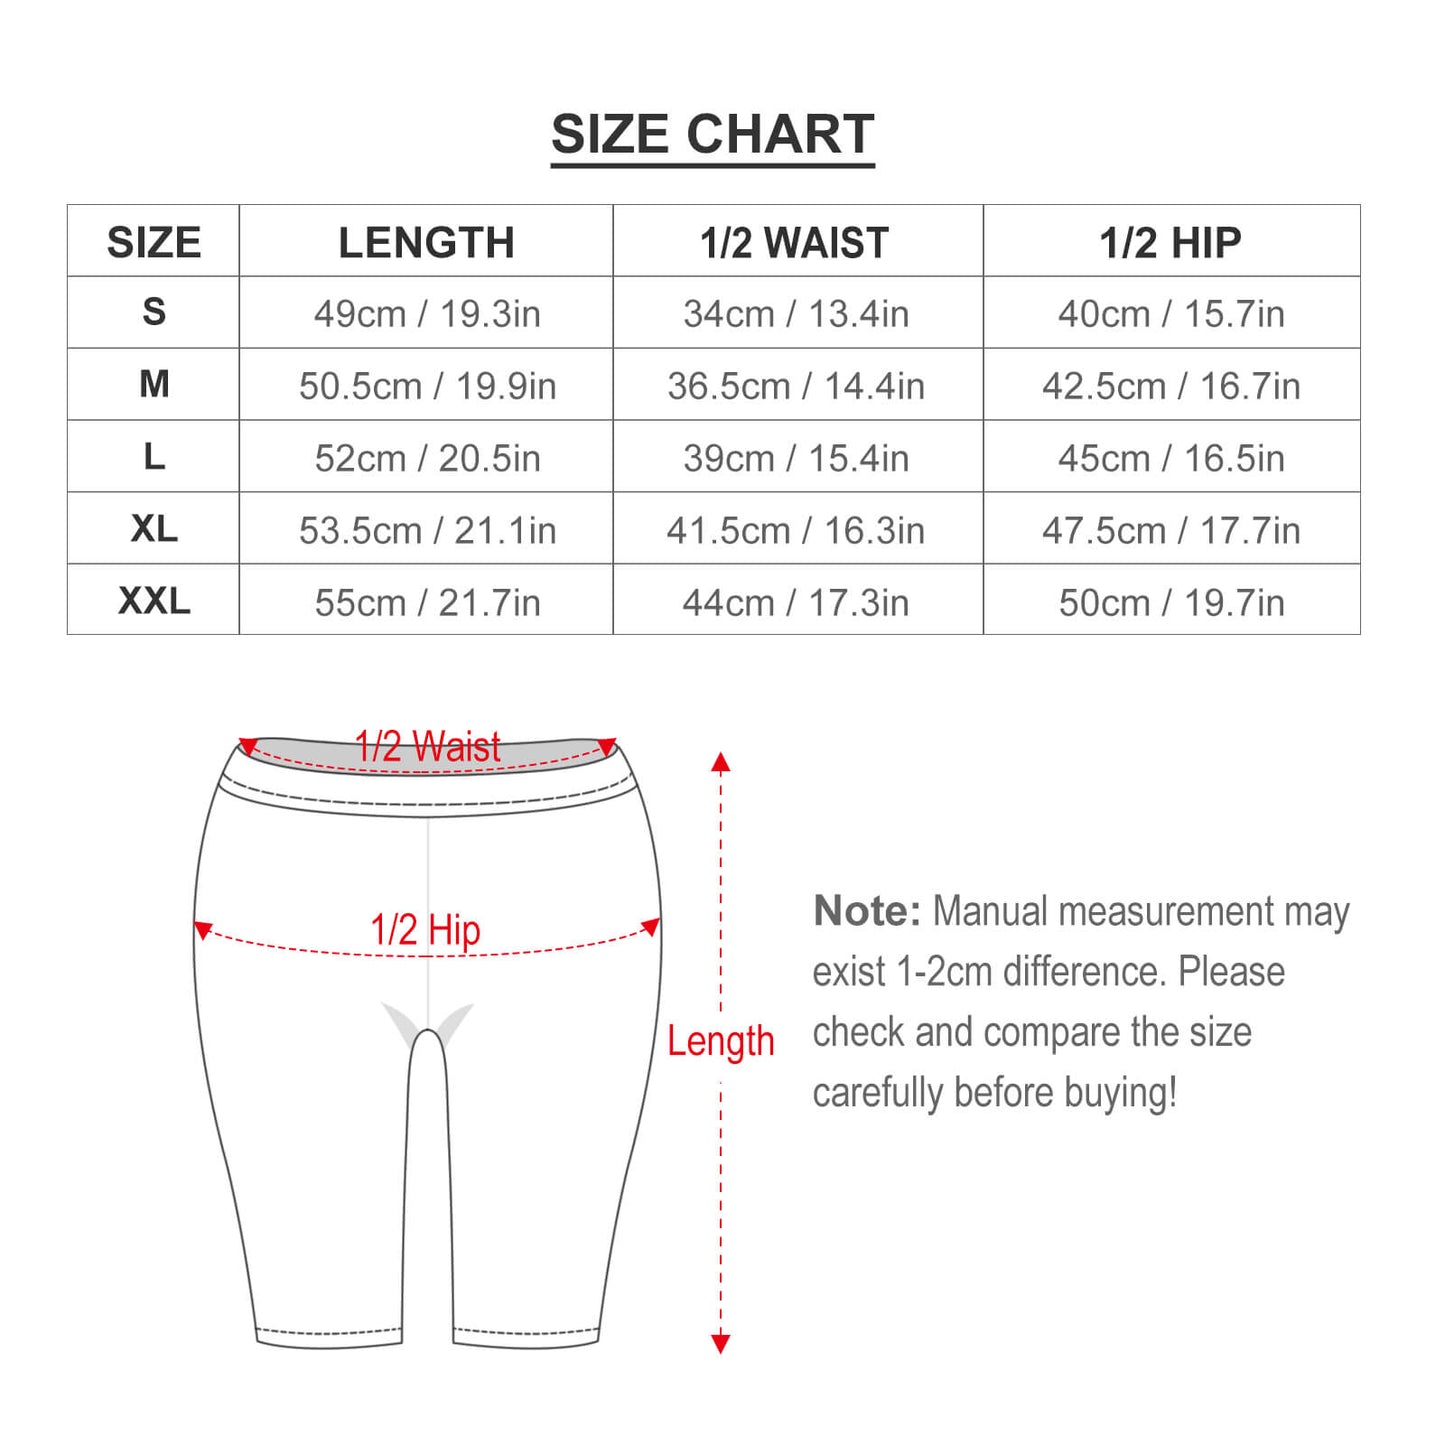 Character Donuts Women's Knee Length Athletic Yoga Shorts With Pockets